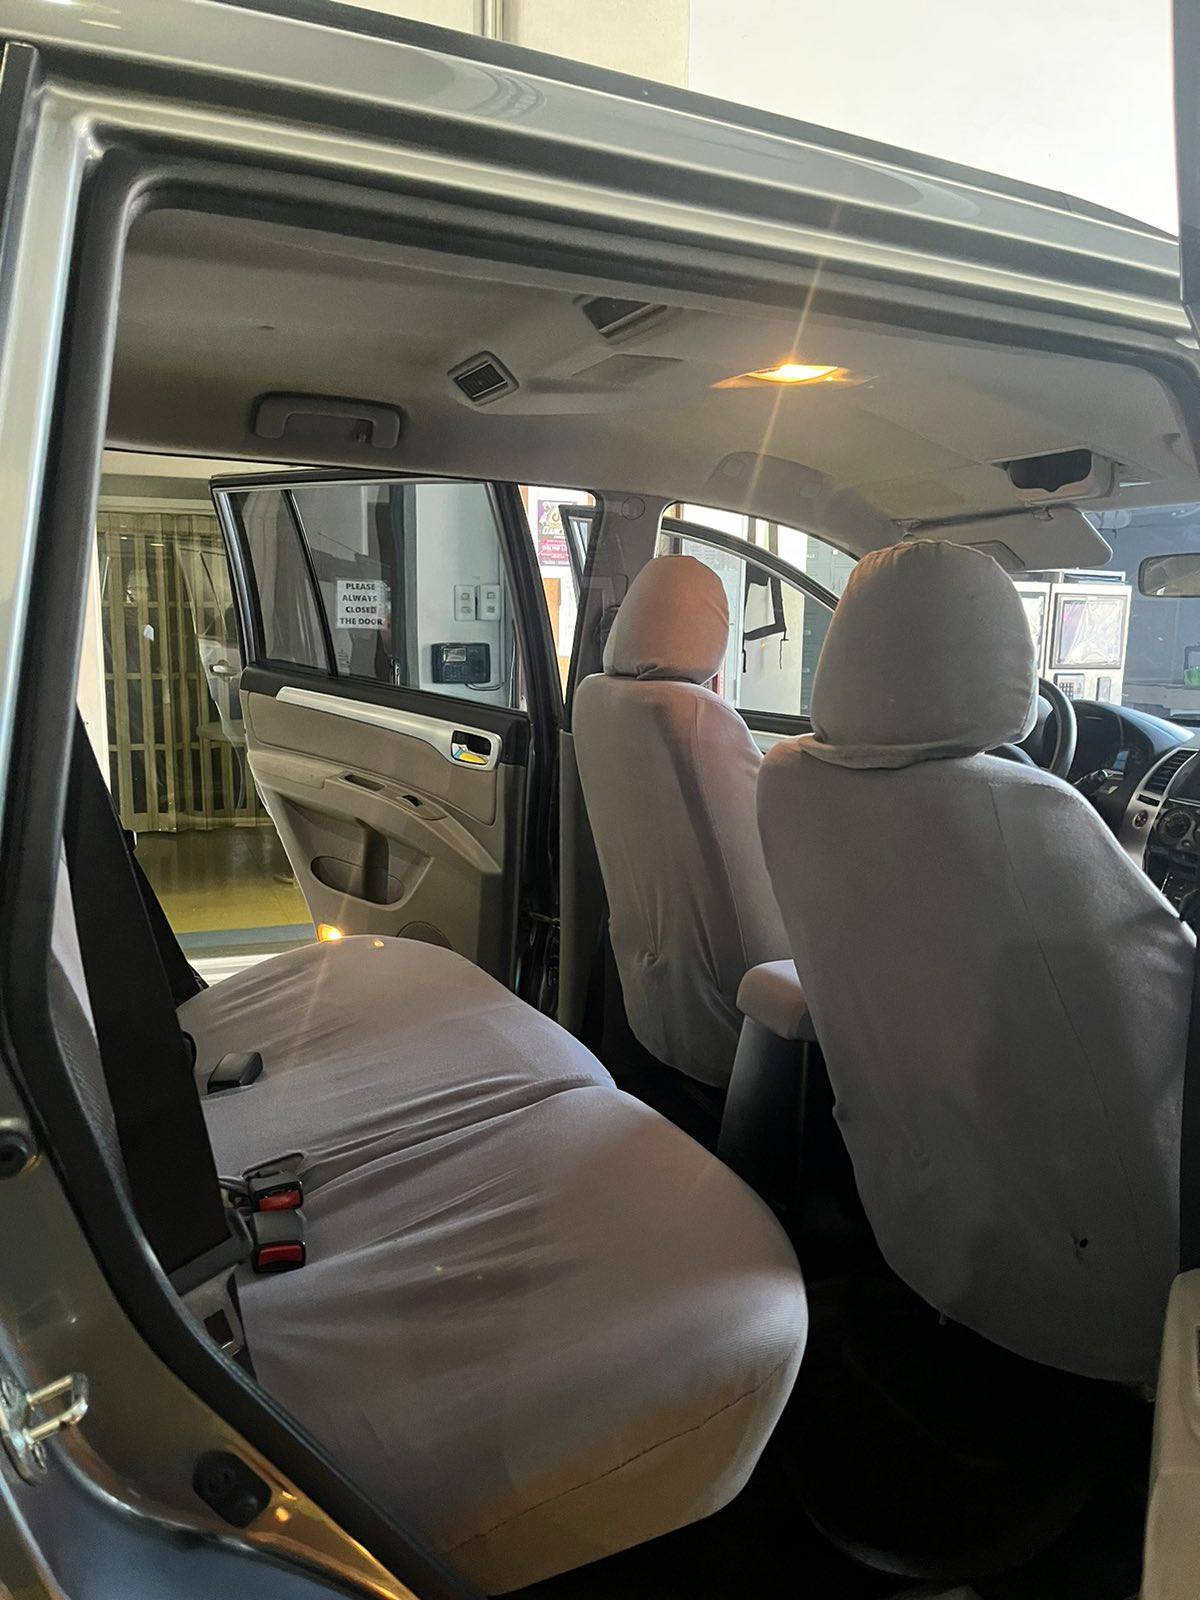 Old 2015 Foton View Traveller 2.8L 18-Seater